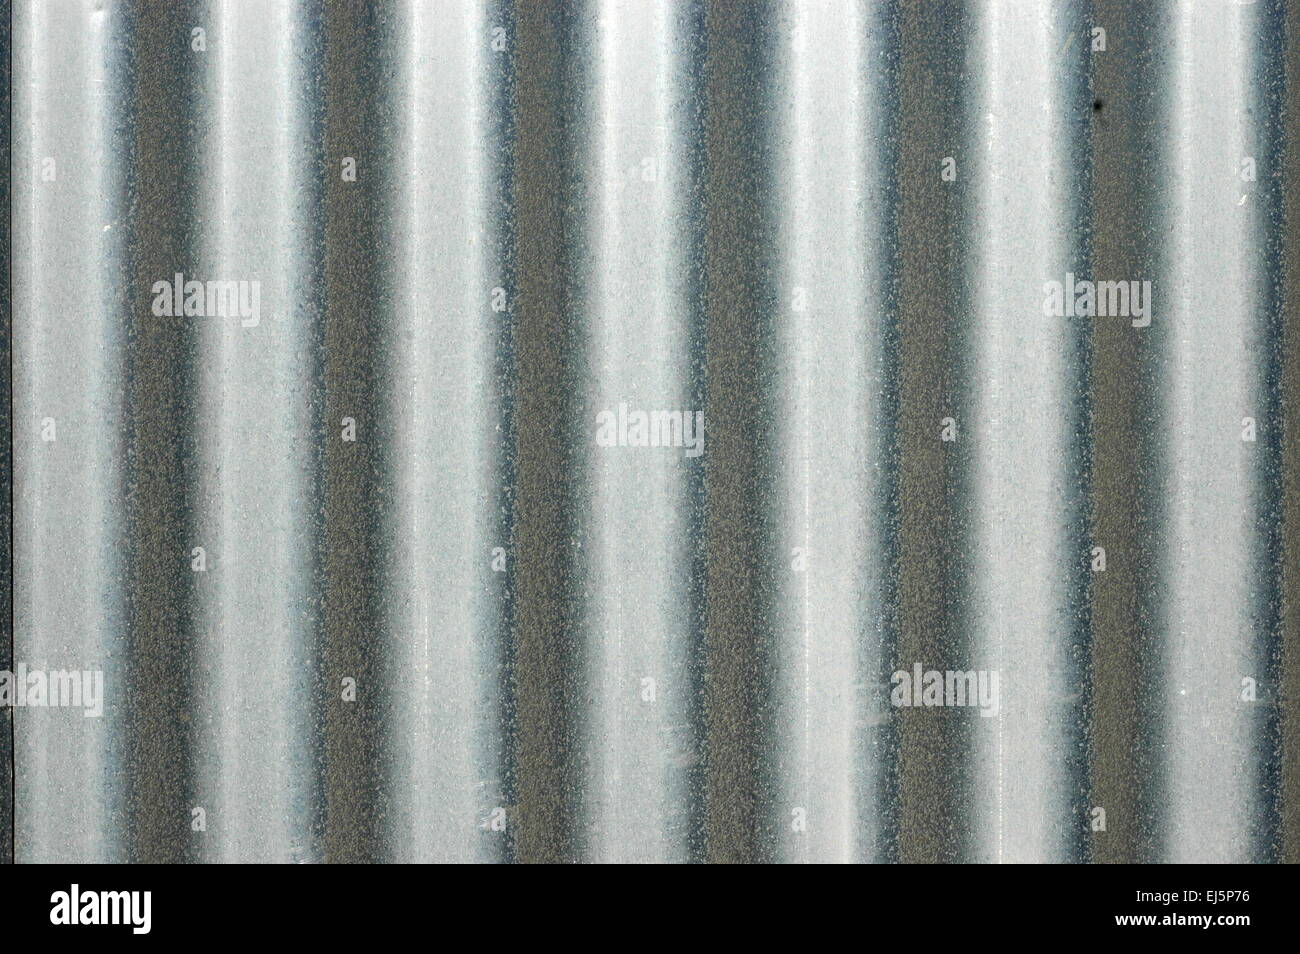 Abstract Background Texture of Corrugated Iron Stock Photo